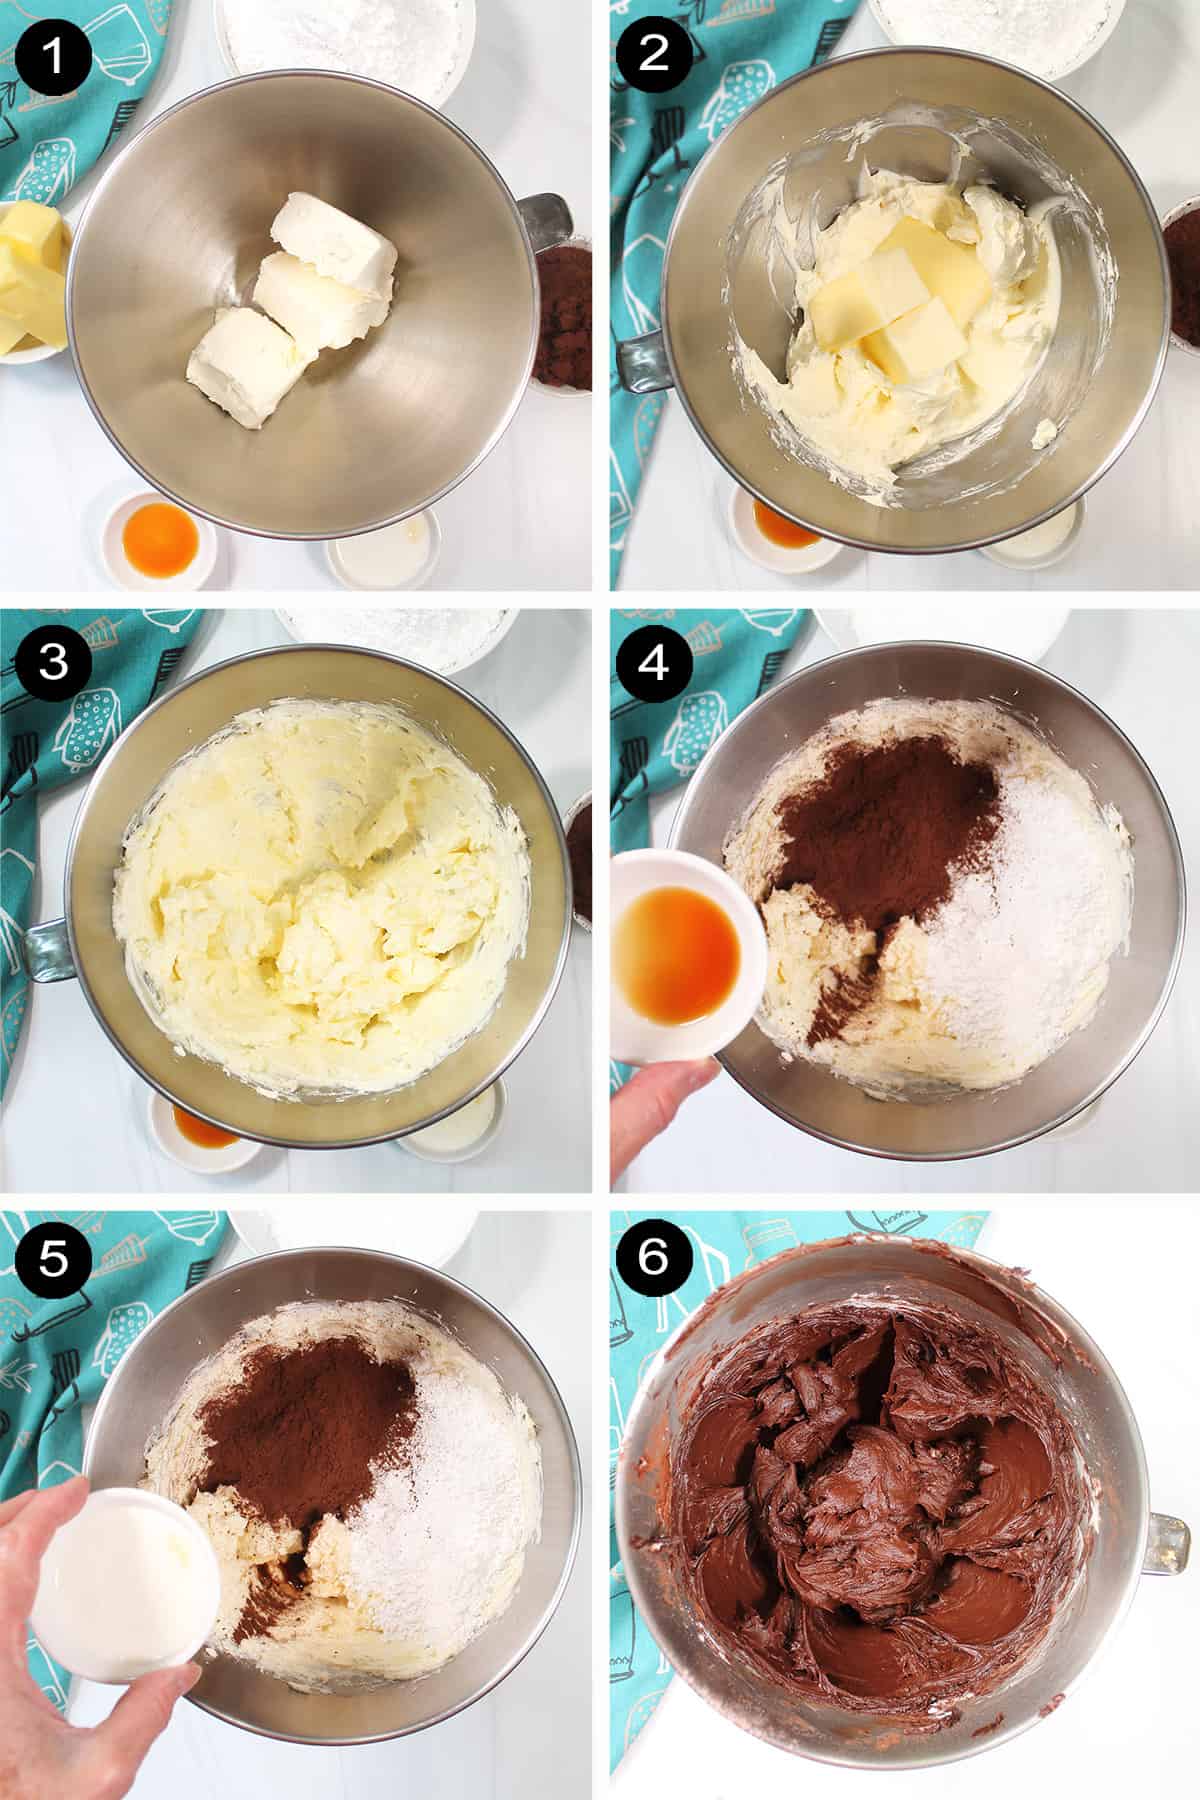 Steps to make chocolate cream cheese frosting for cake.